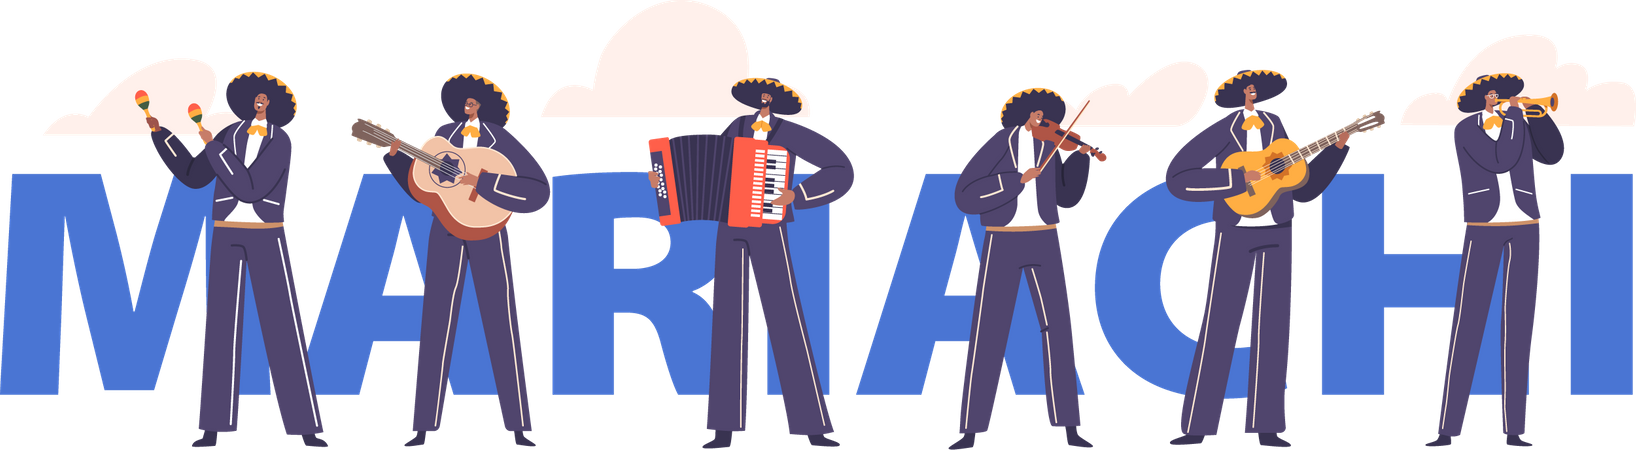 Mariachi musicians playing traditional mexican music  Illustration